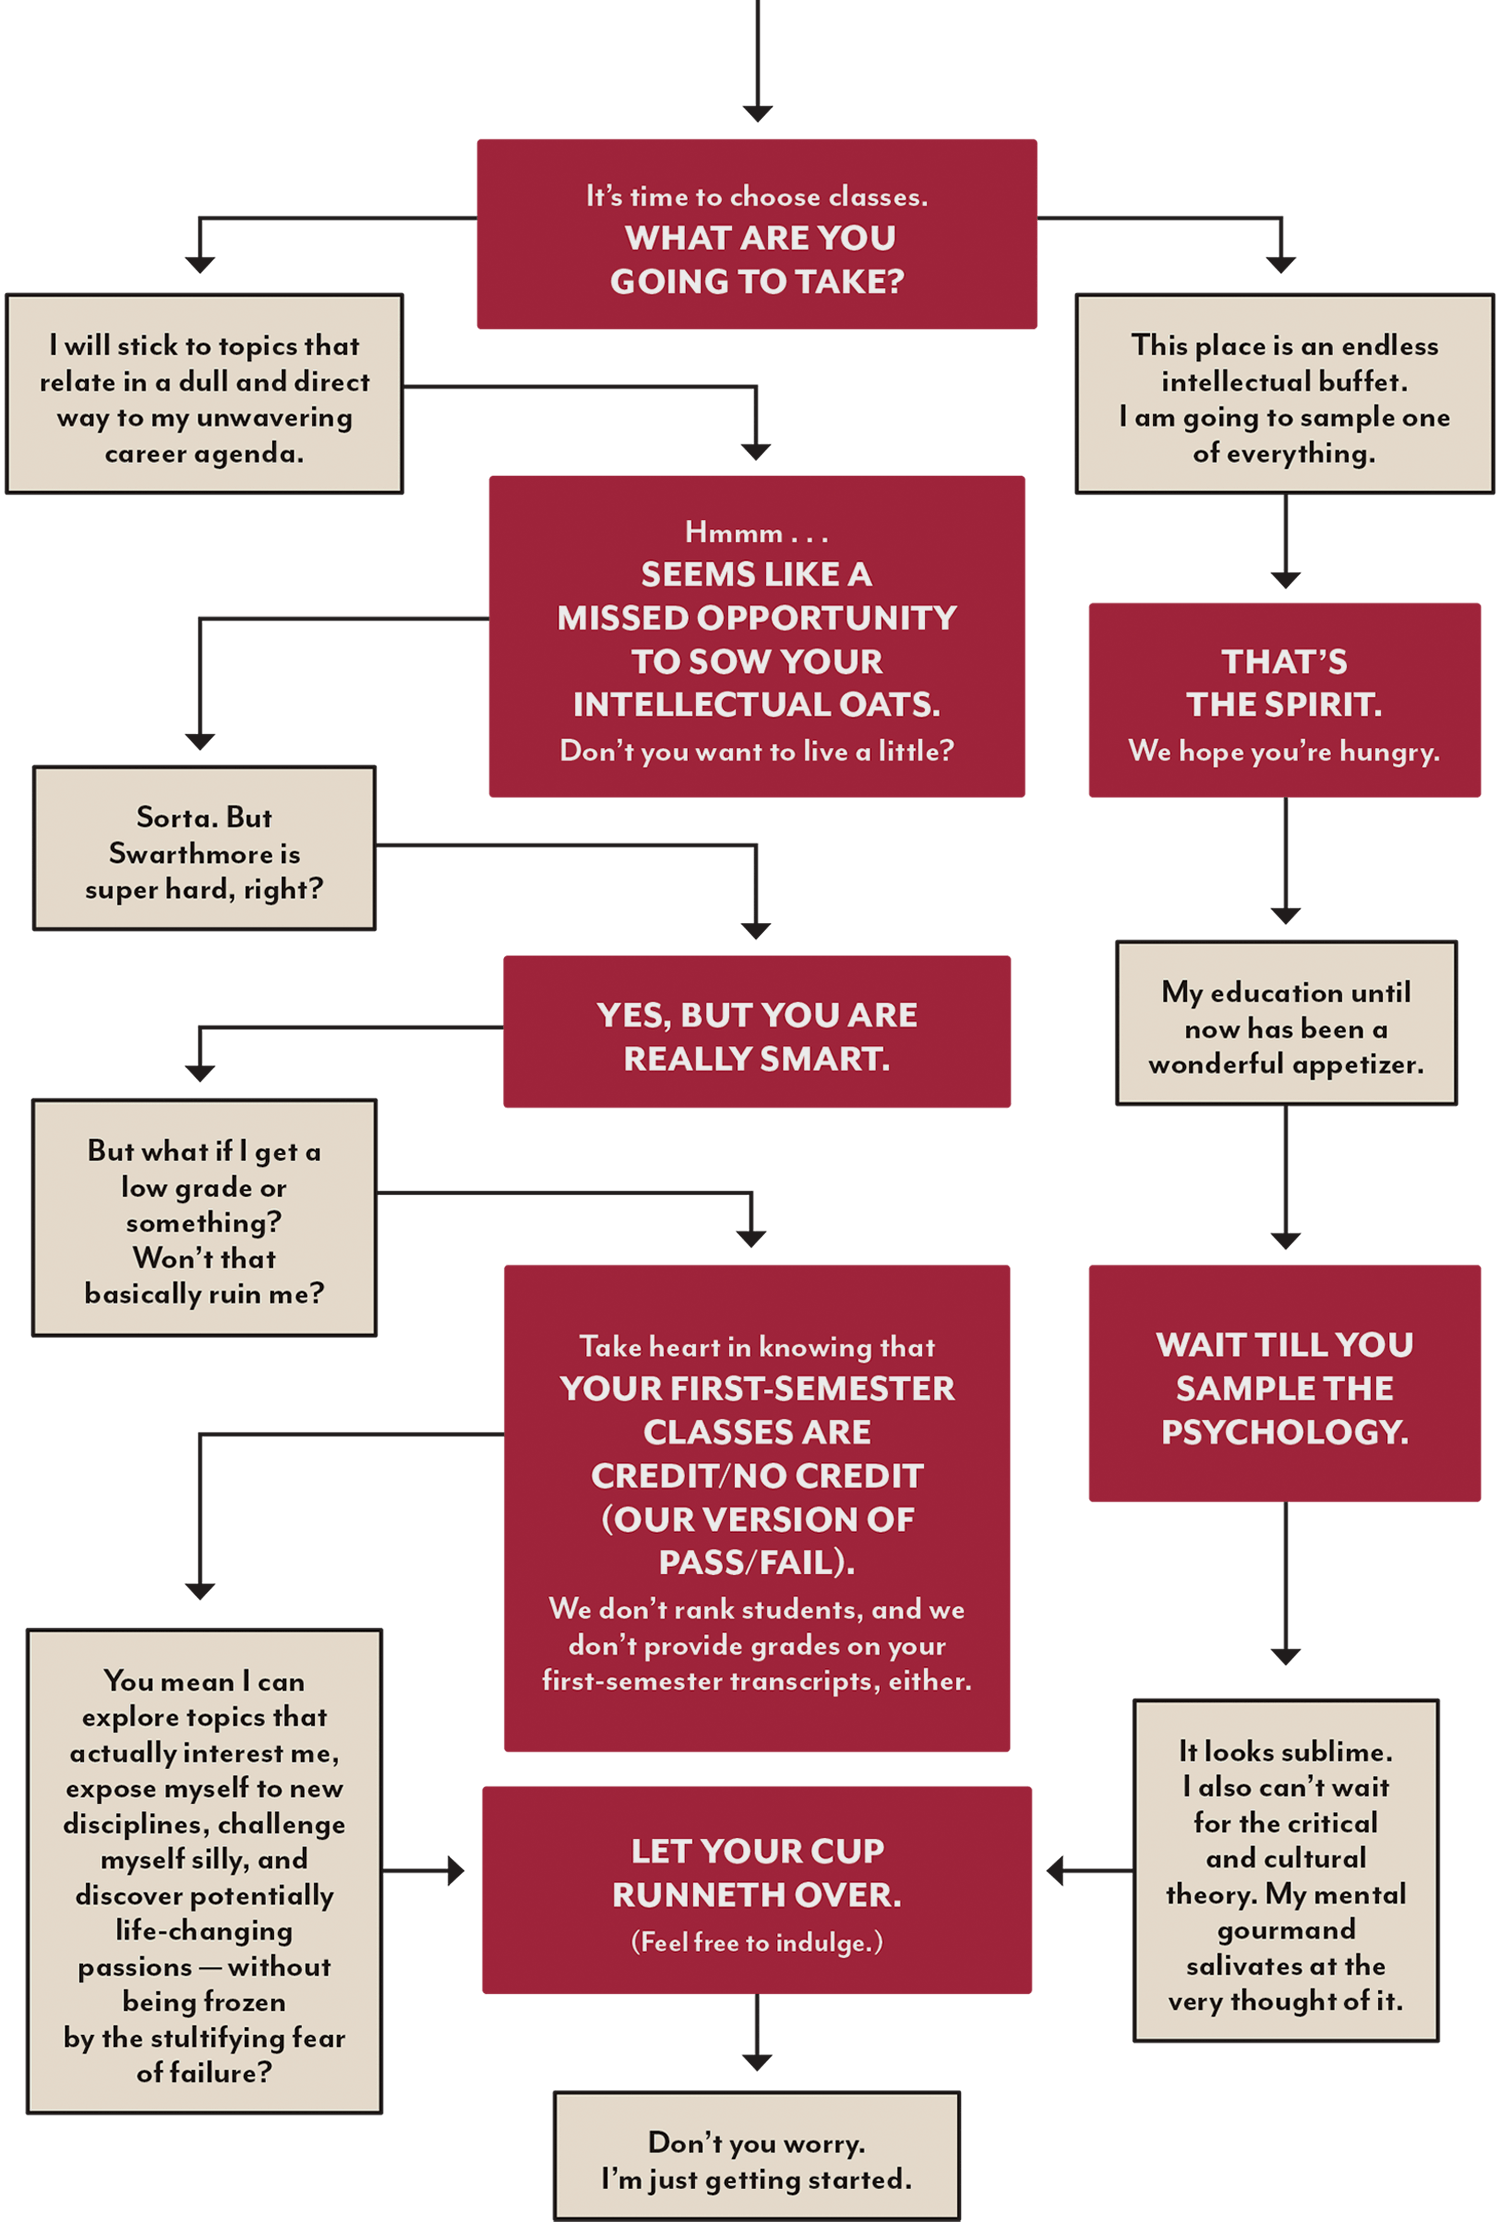 Flowchart presenting an interaction where Swarthmore is encouraging a first semester student to take classes that are different from their career agenda